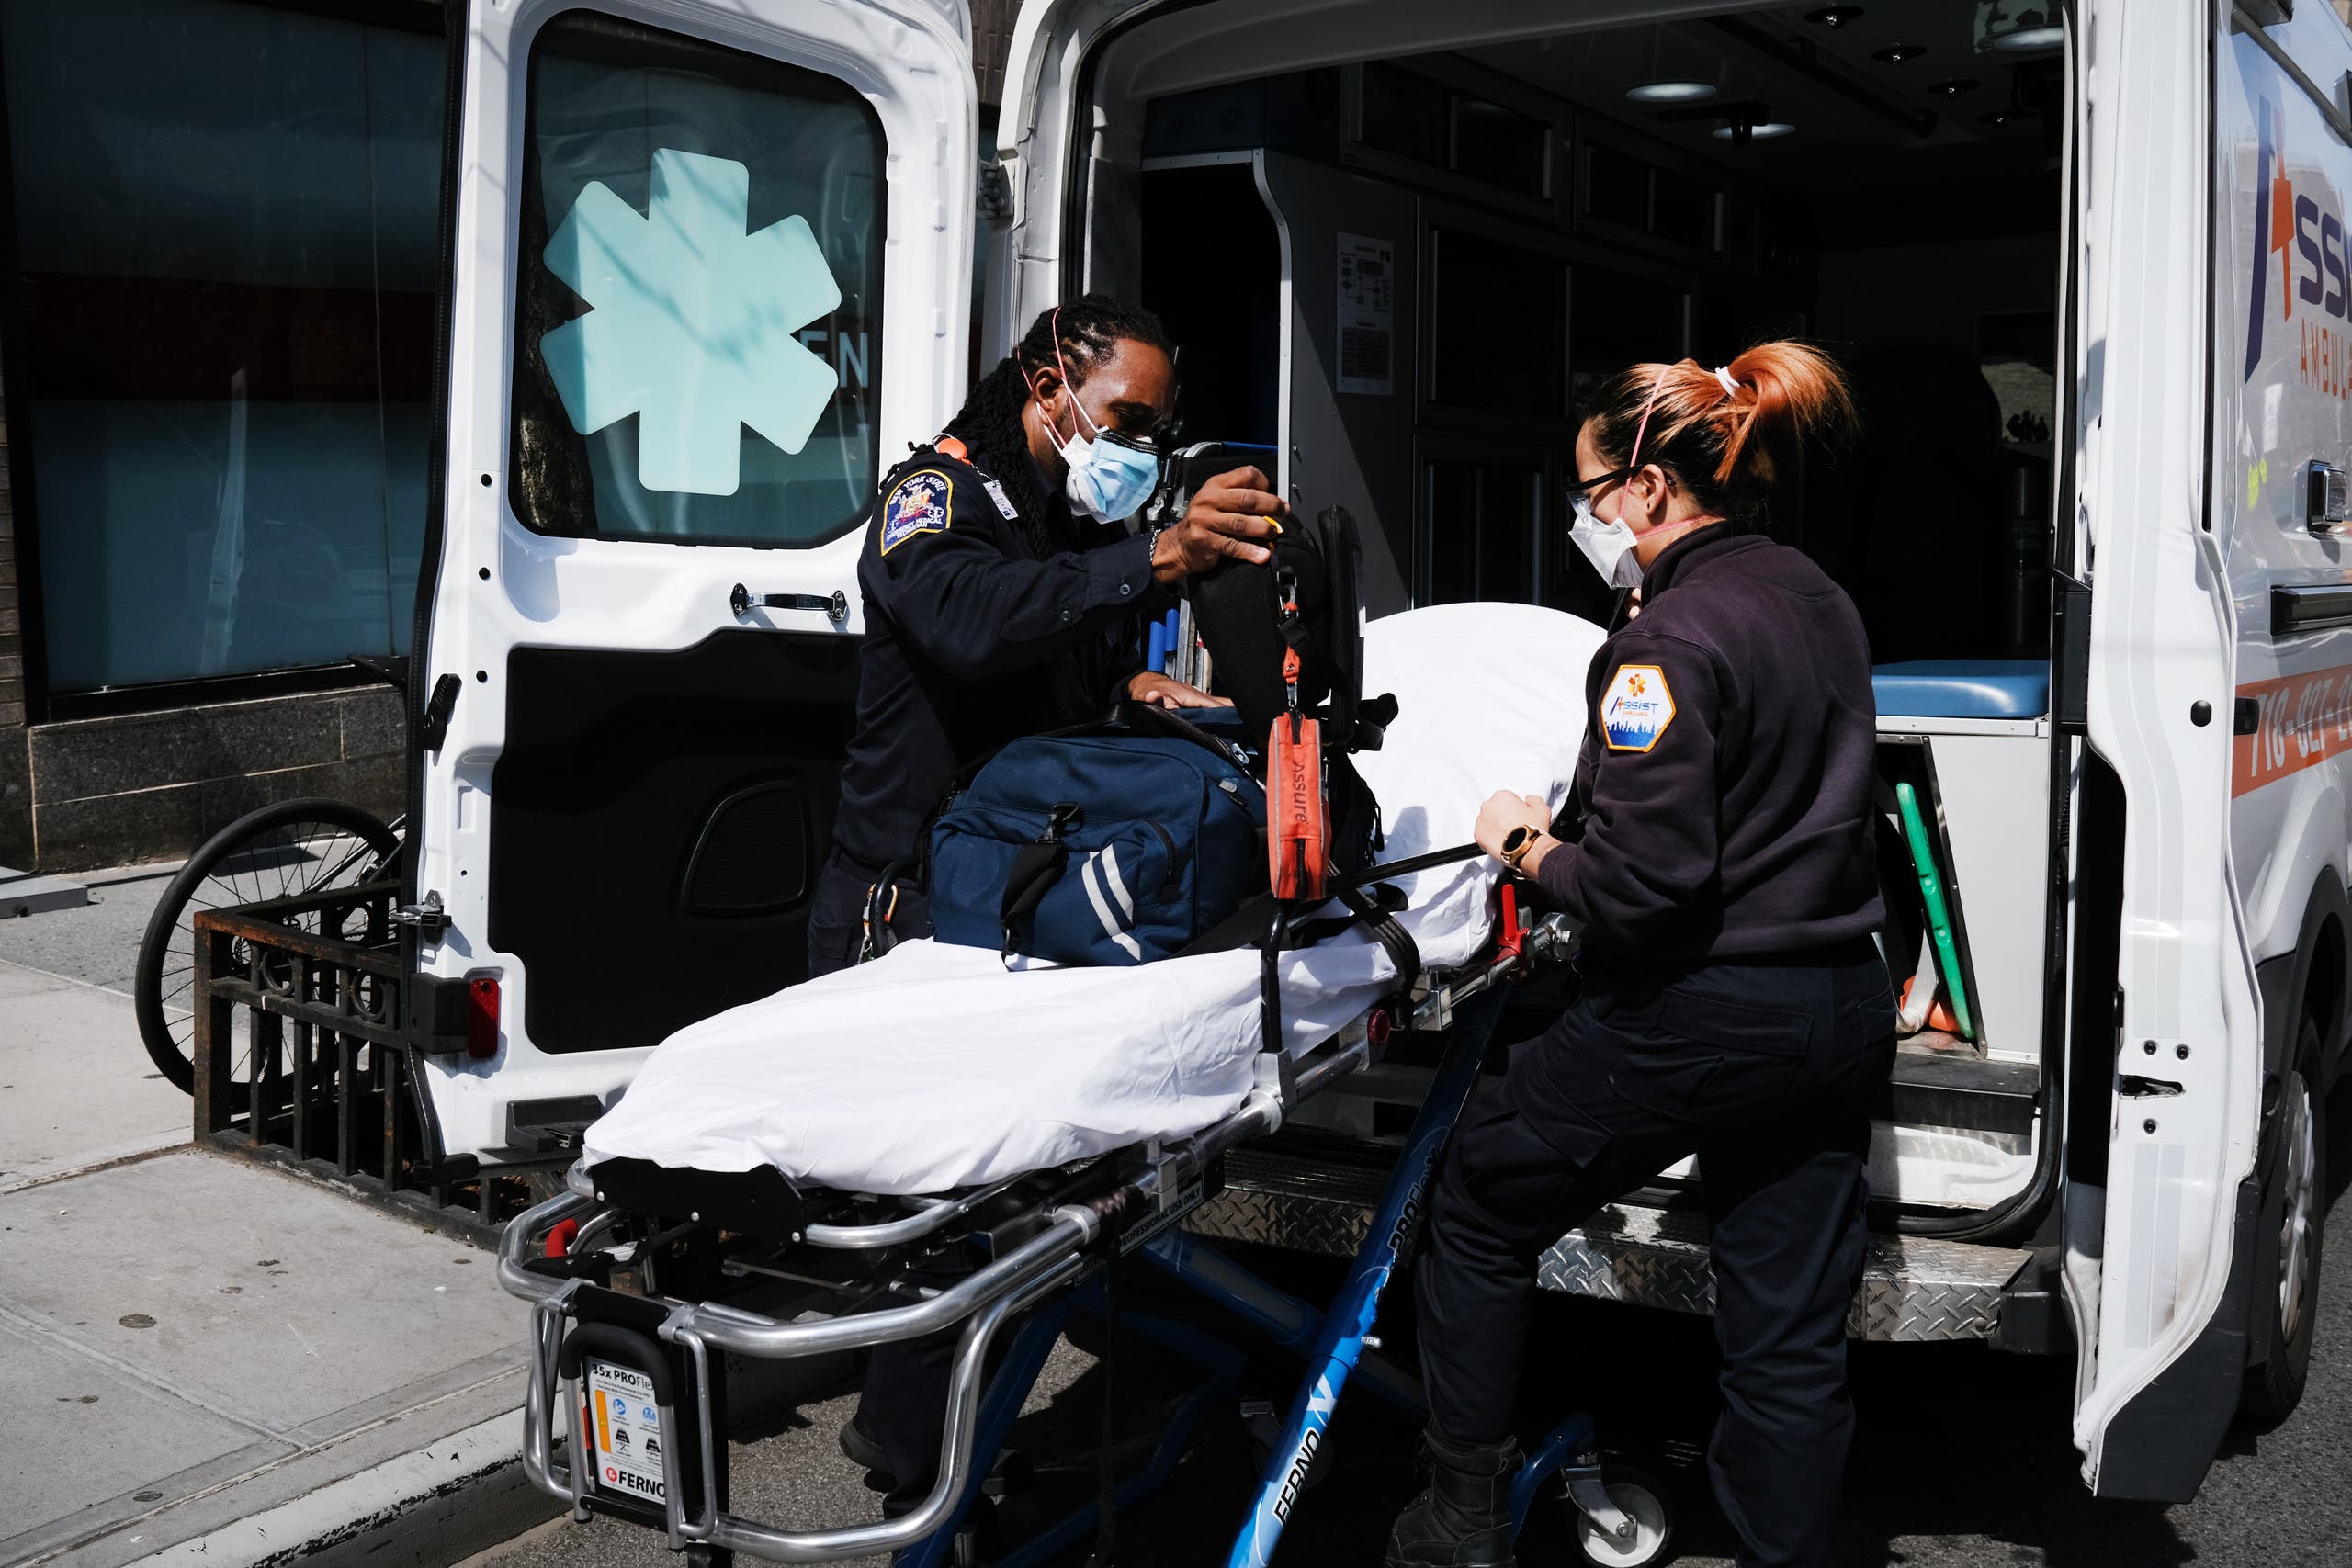 Ambulance workers clean a gurney at Mount Sinai Hospital amid the coronavirus pandemic on April 01, 2020 in New York City. (AFP)